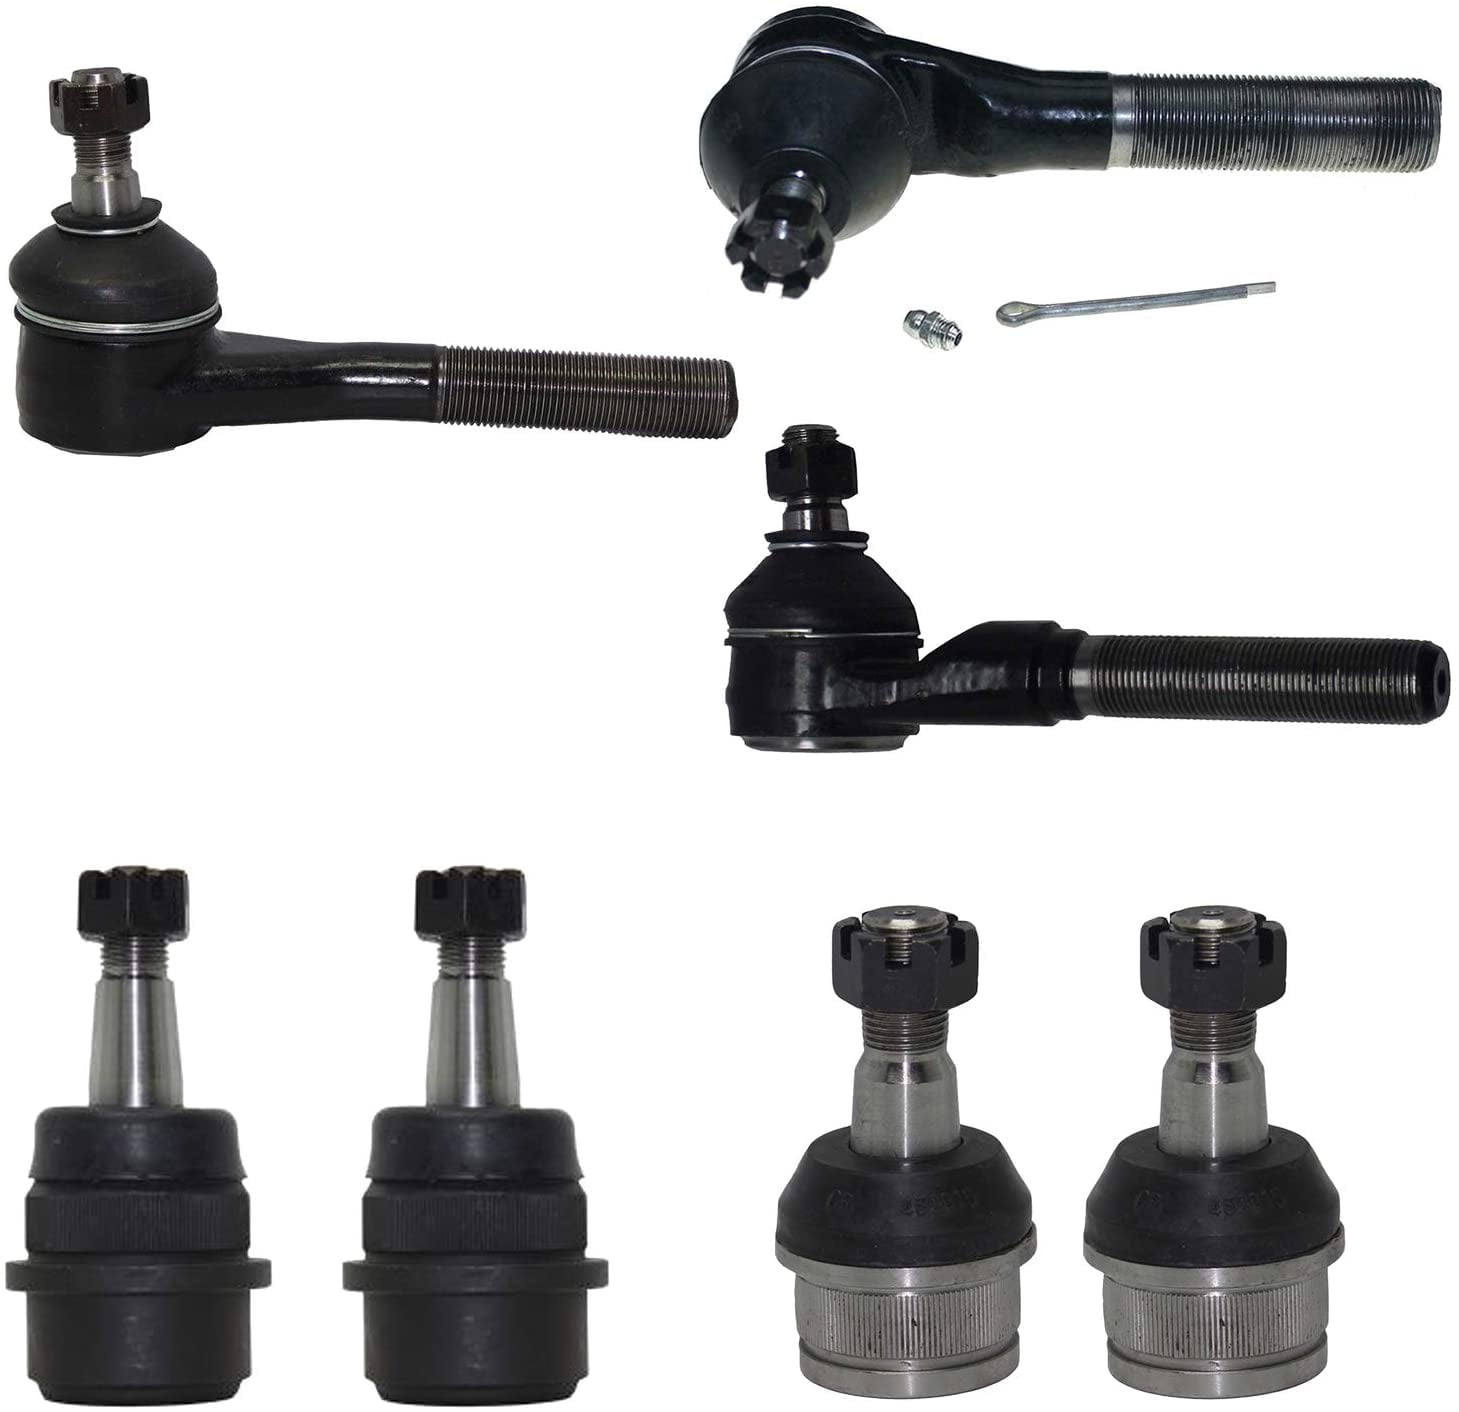 4 Pc Suspension Kit Fits Jeep Grand Cherokee Wrangler Upper /& Lower Ball Joints